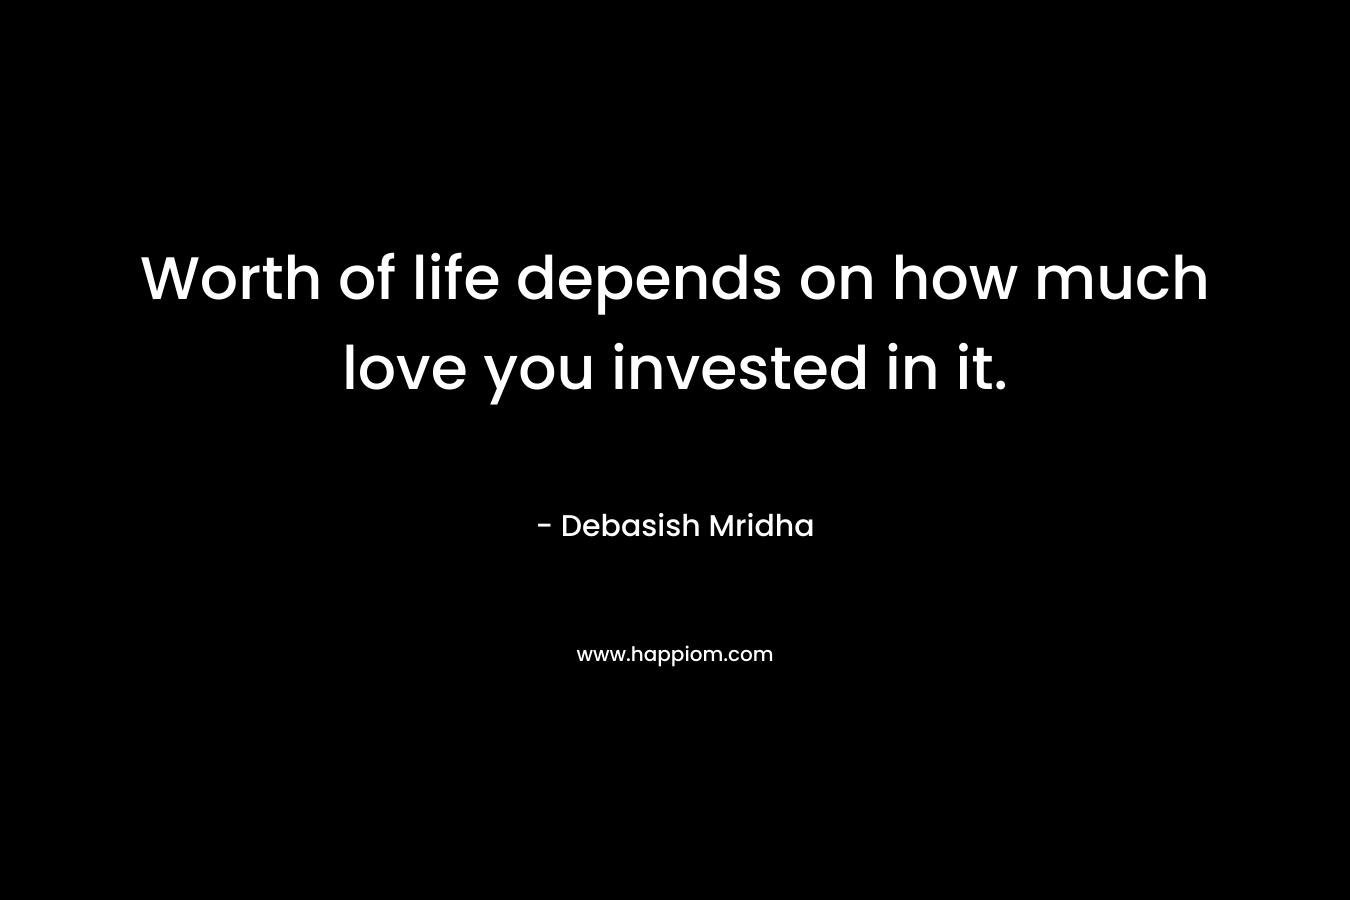 Worth of life depends on how much love you invested in it.